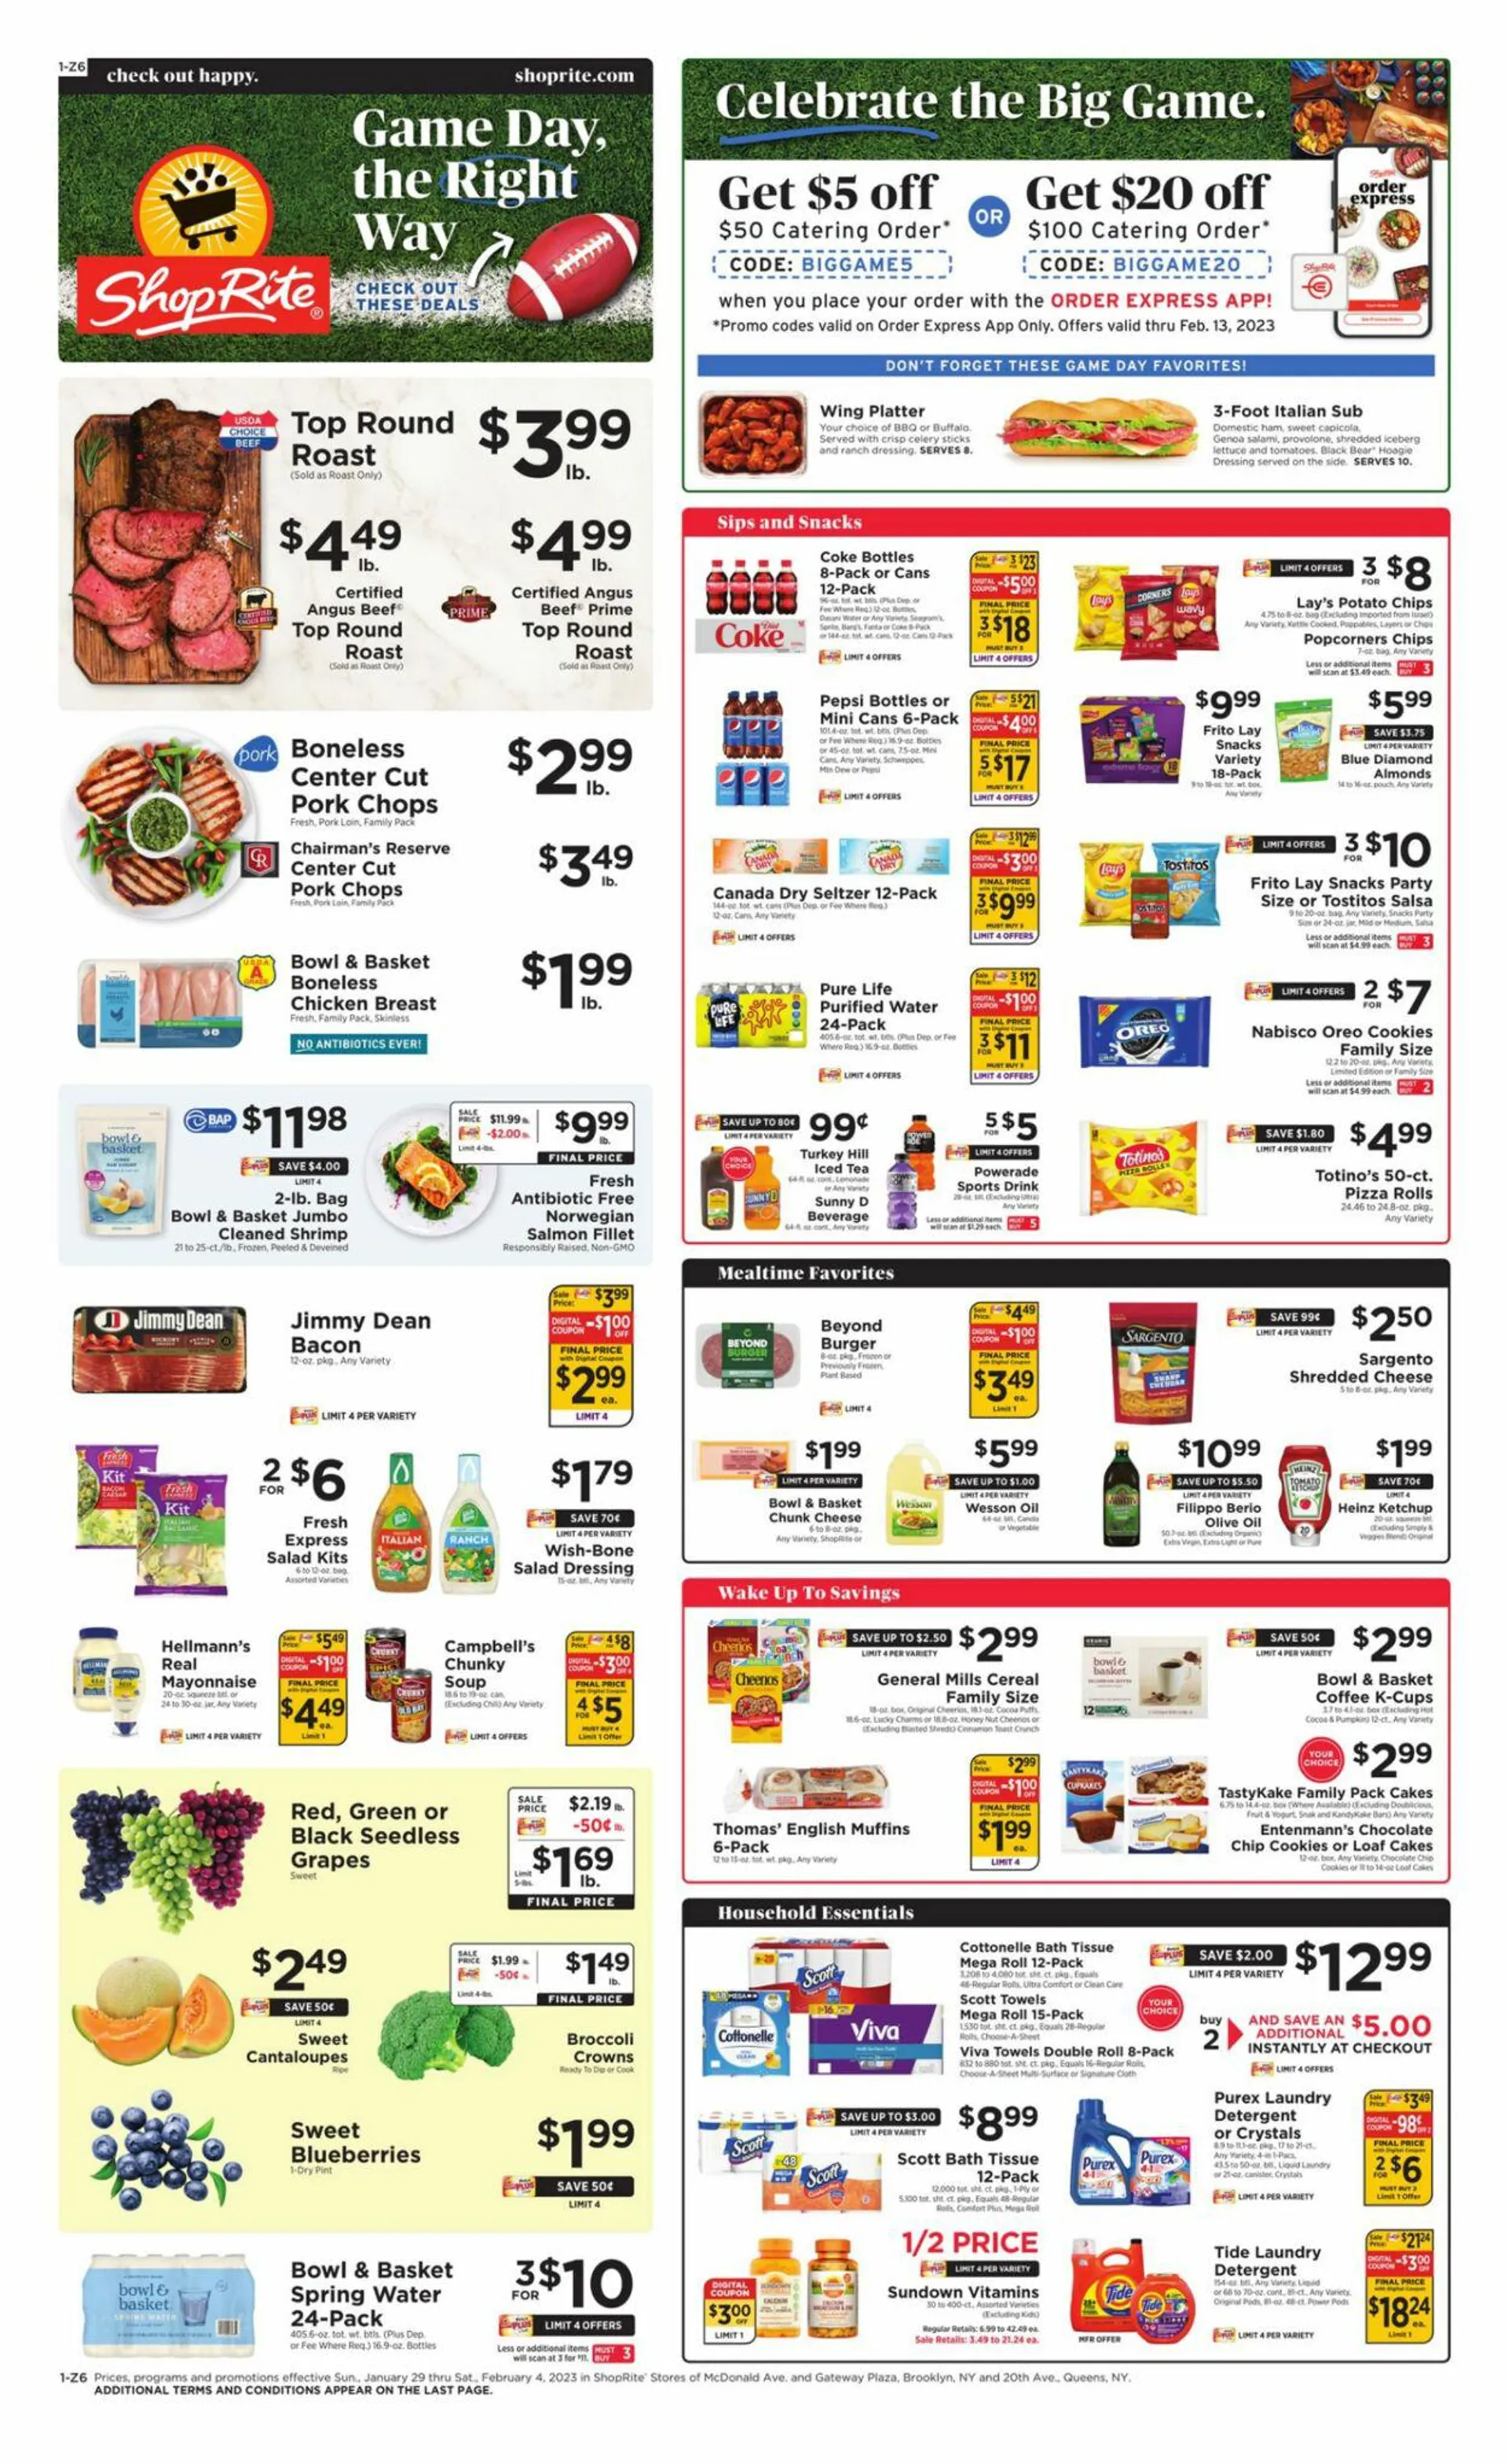 ShopRite Current weekly ad - 1